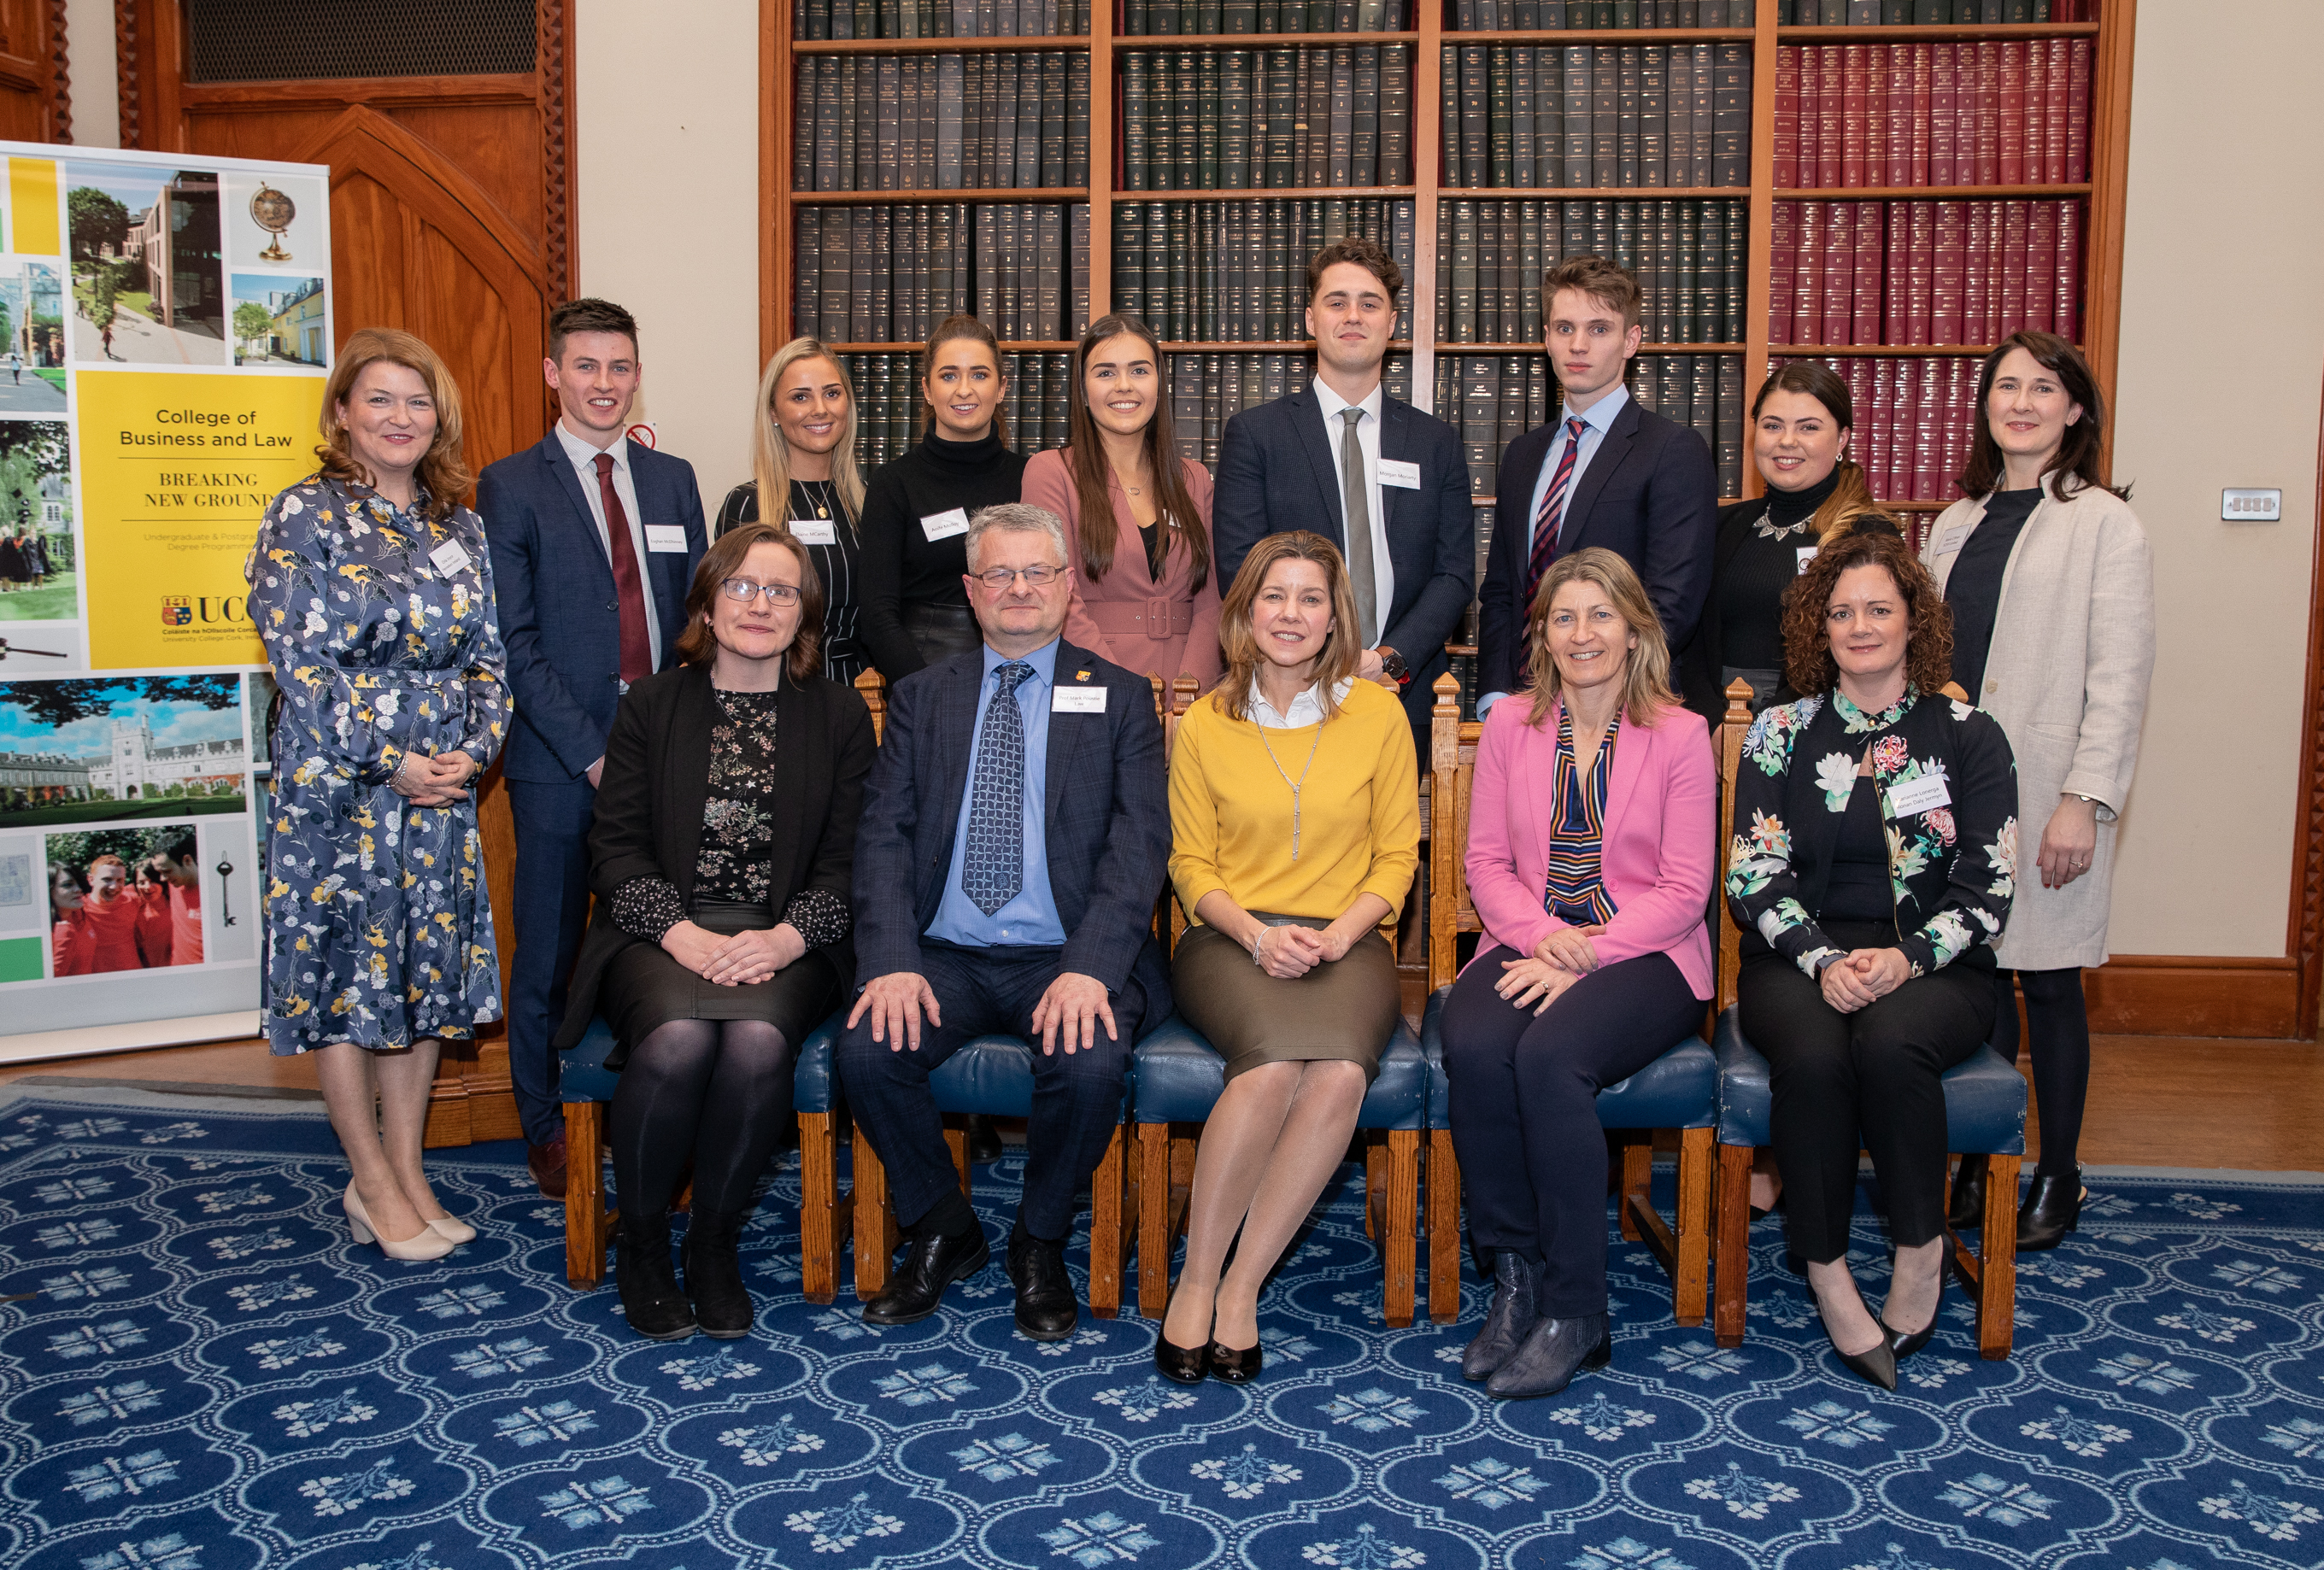 School of Law students recognised at College Work Placement Awards